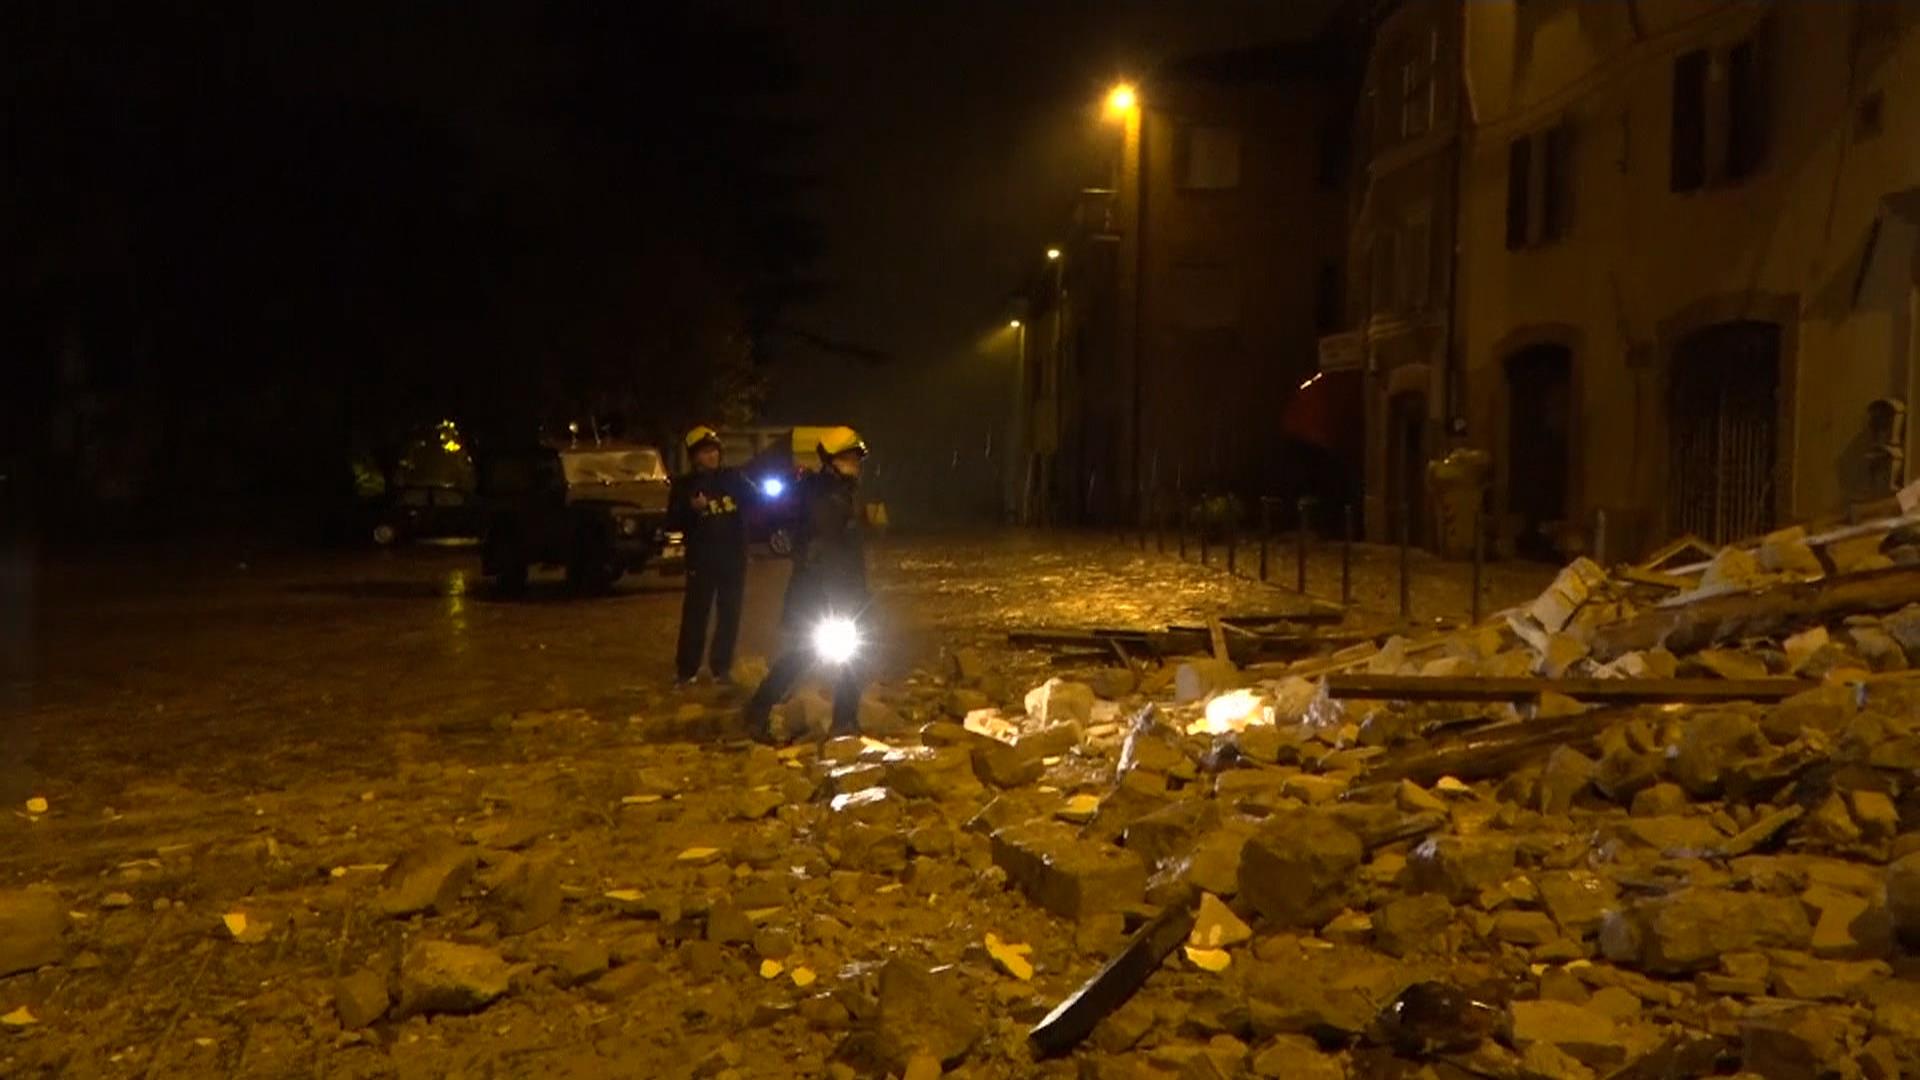 2 powerful earthquakes hit Italy near location of deadly August quake